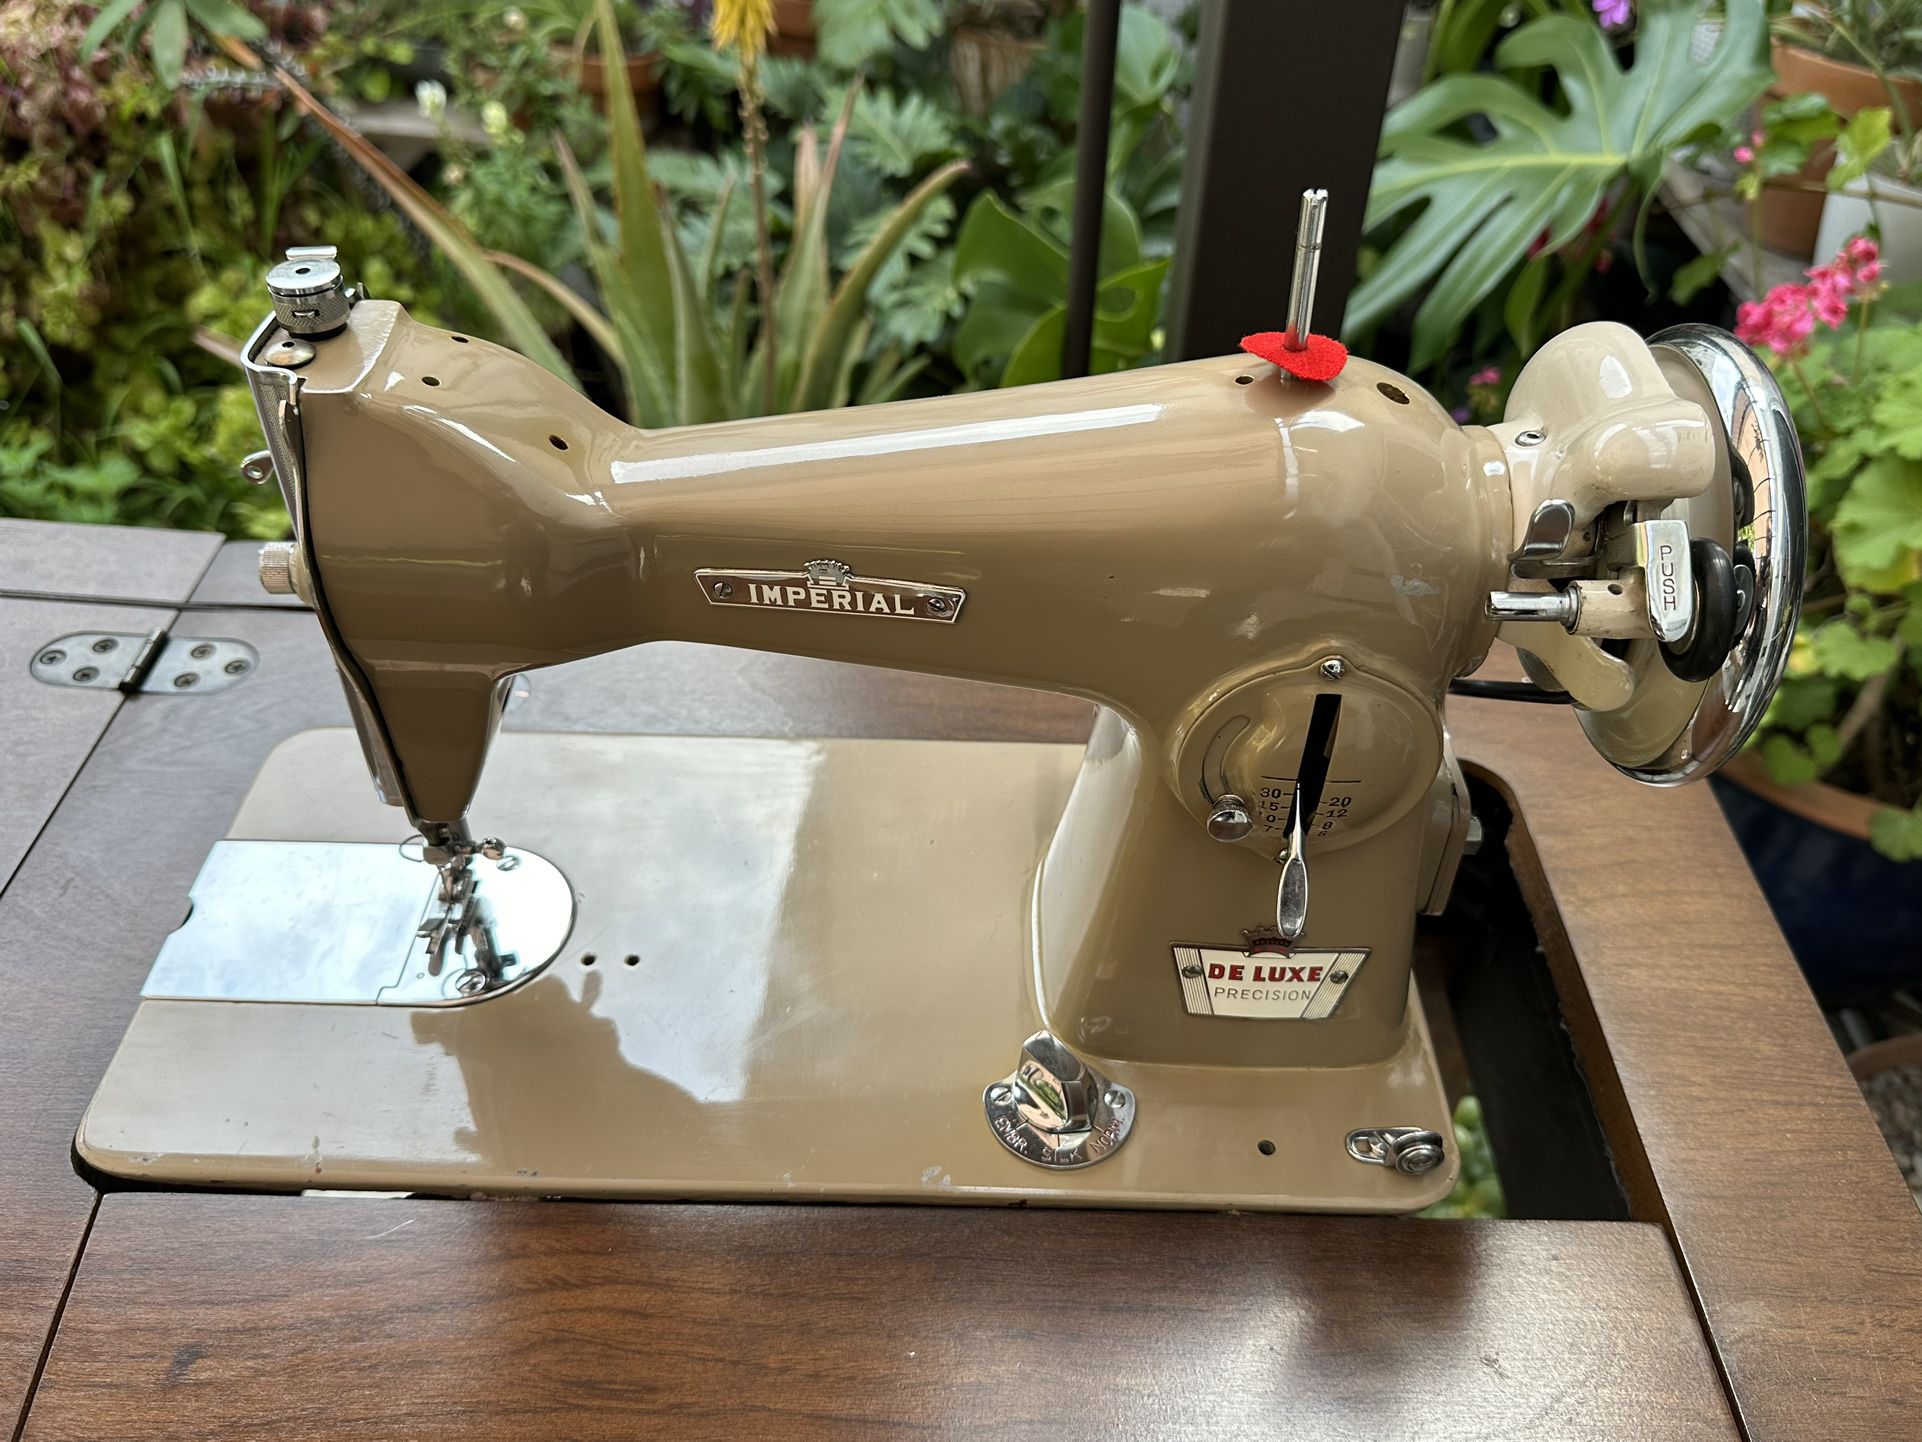 Imperial Deluxe Precision Sewing Machine